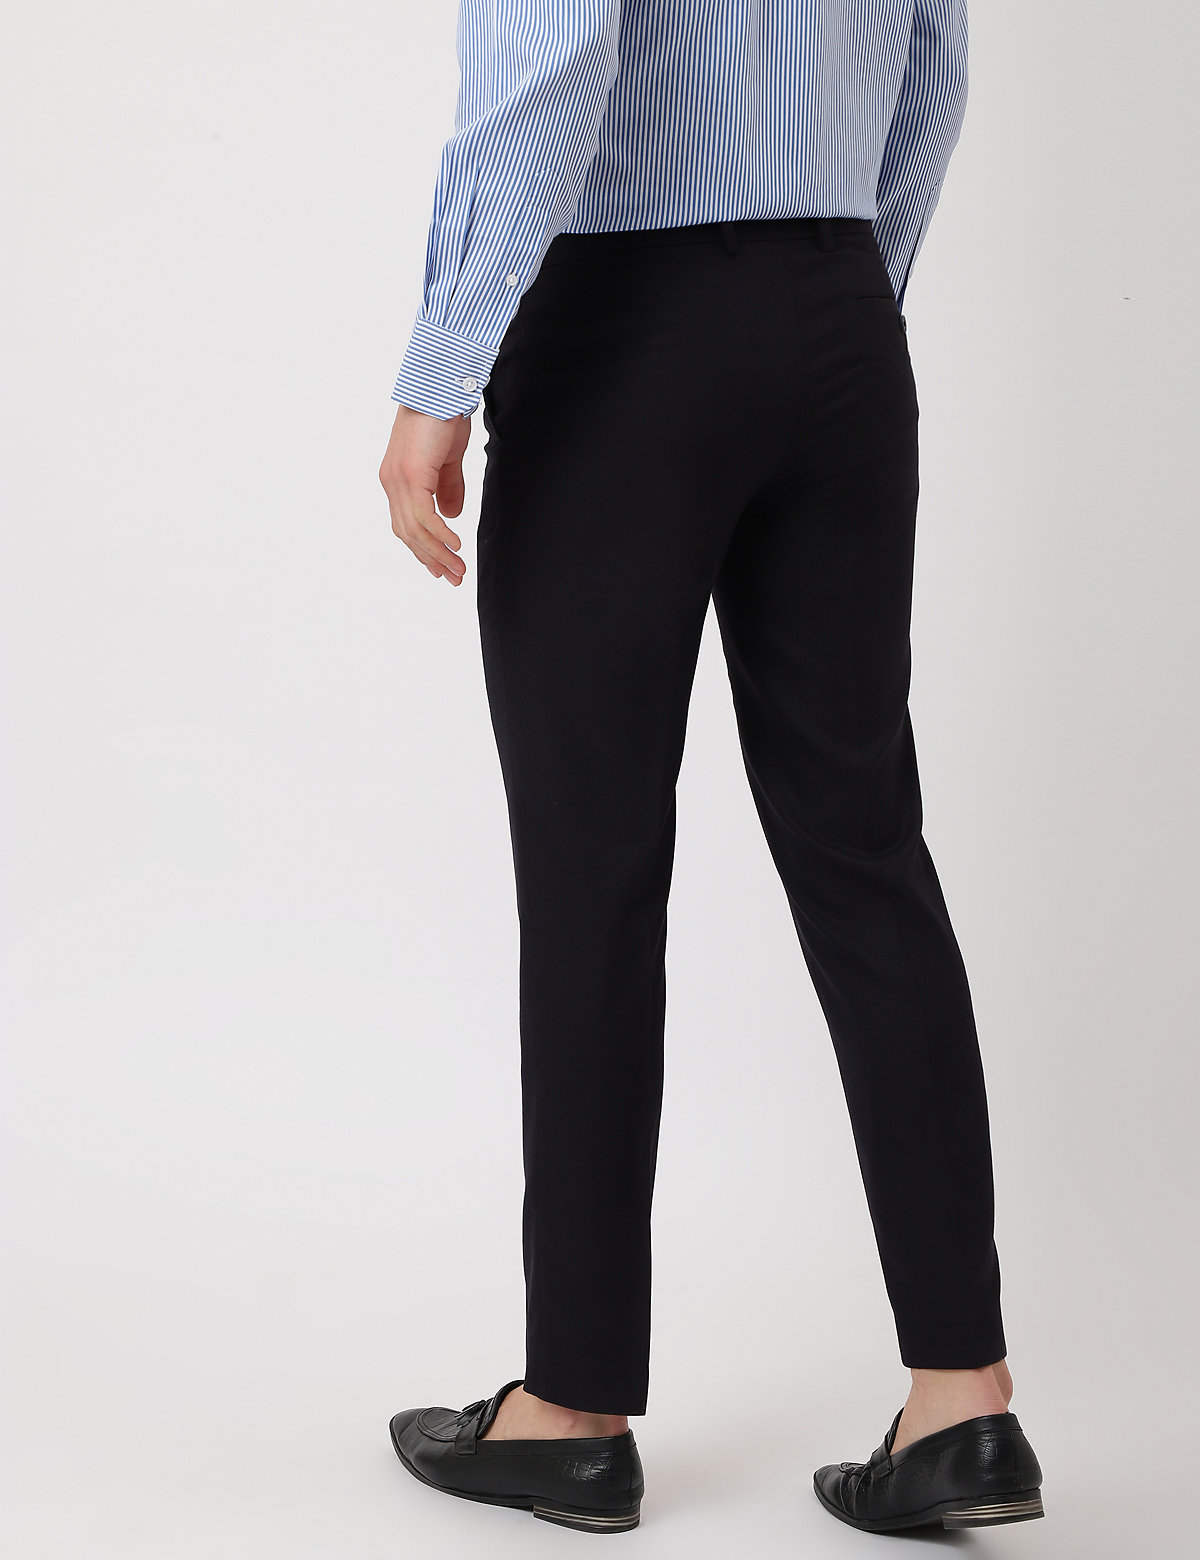 Poly Mix Textured Slim Fit Trouser